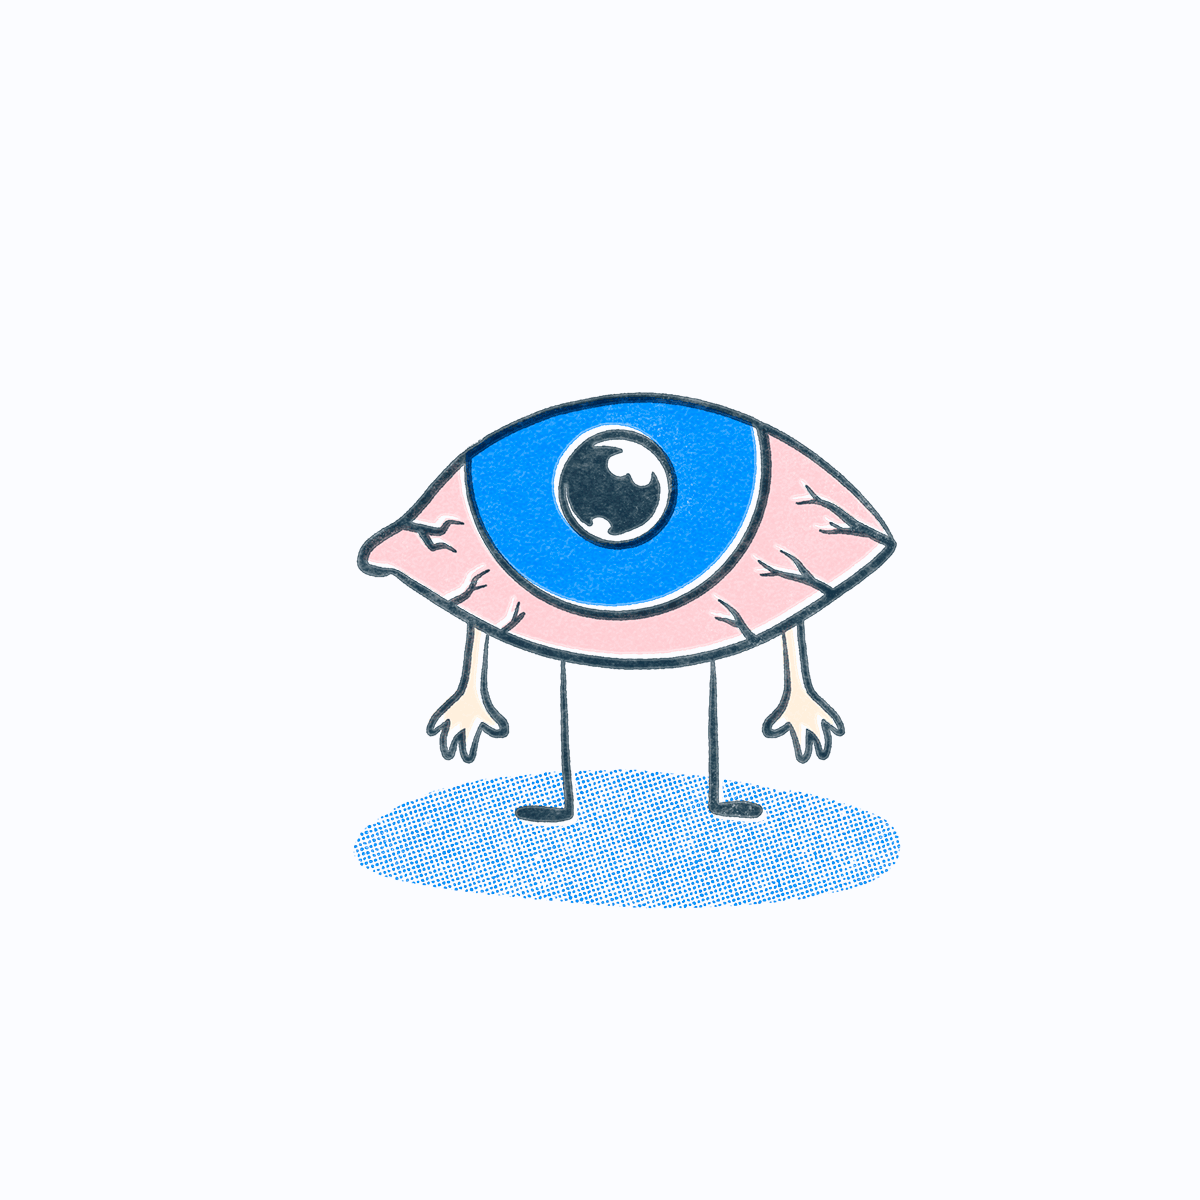 An eyeball with hands and feat. Illustration.